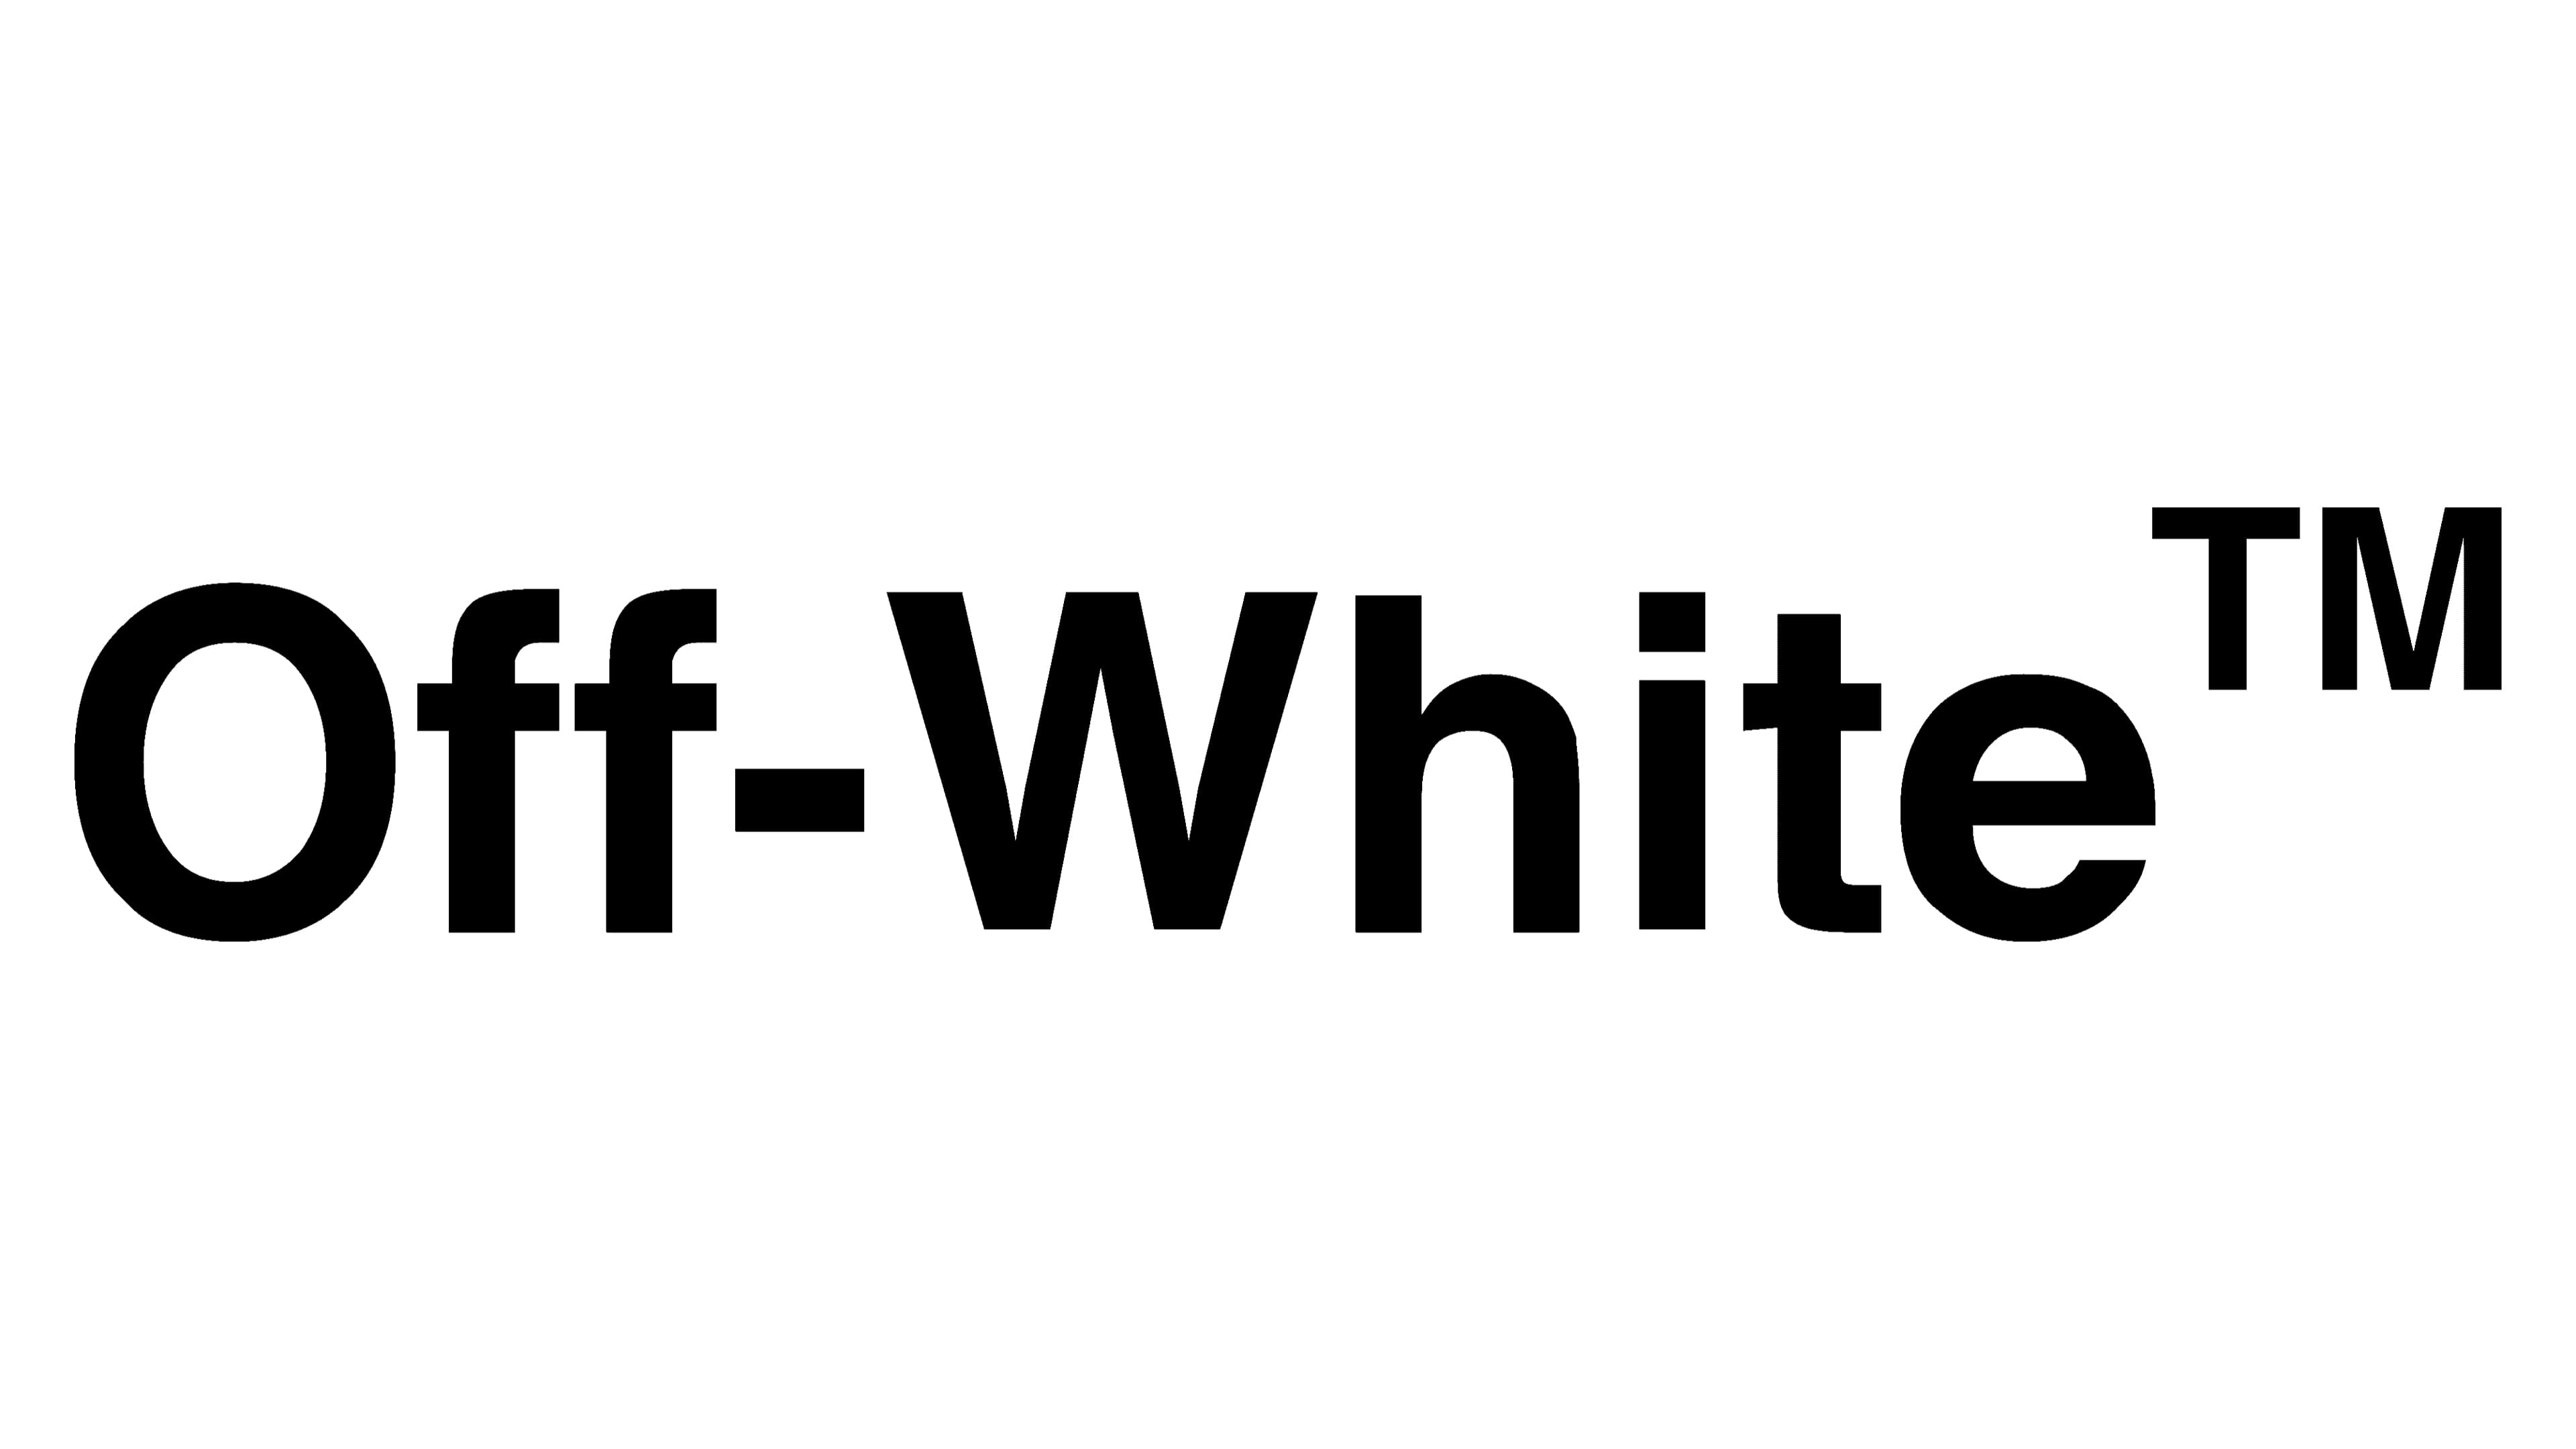 Has Off-White Just Confirmed Its New Logo?